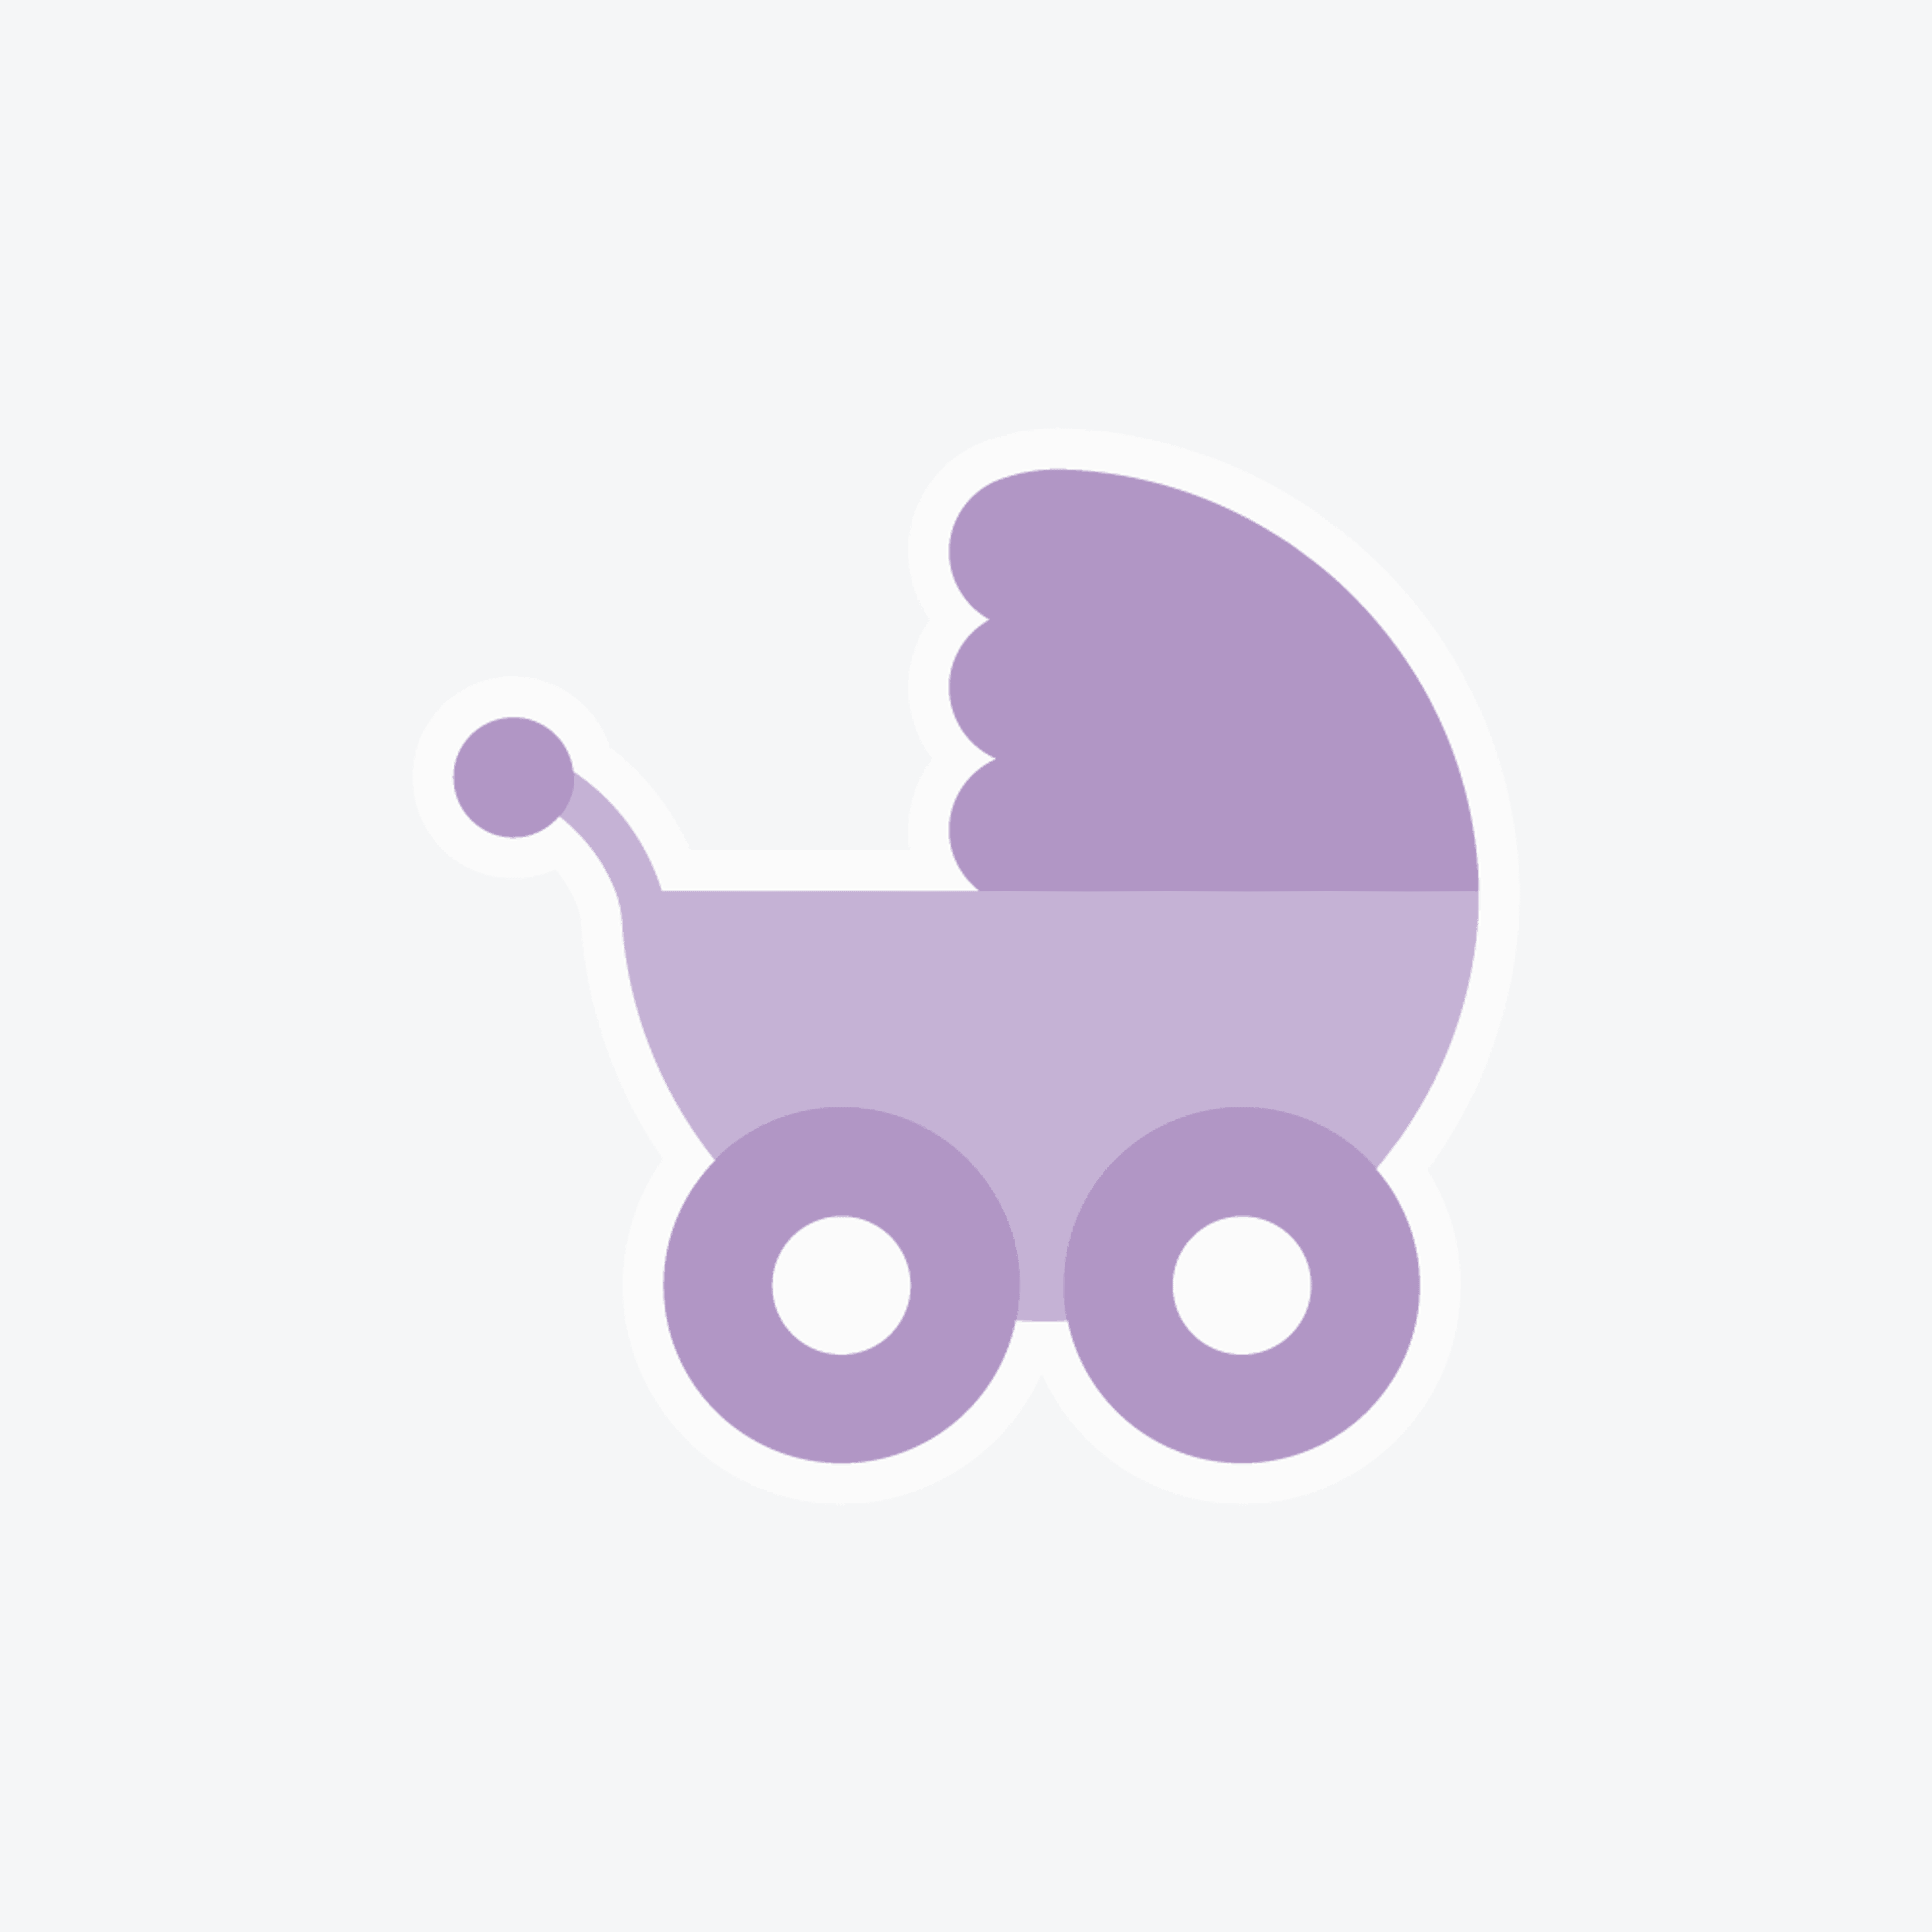 Houskeeper/Baby sitter Interested In Work